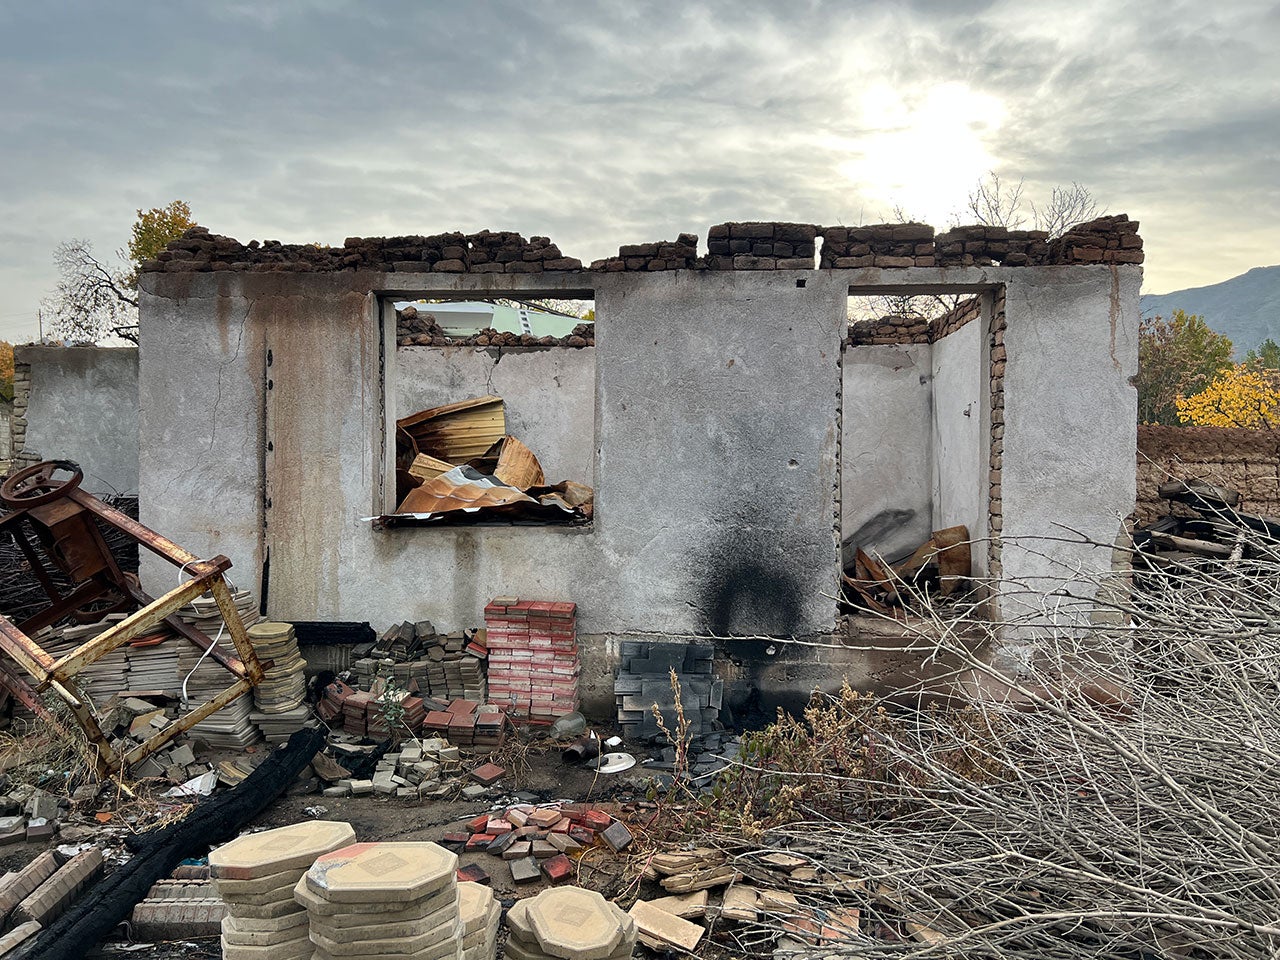 A burnt-out building in the Kyrgyz village of Dostuk (Batken district). The village was completely destroyed by fire  while briefly under the control of Tajik forces on September 16, 2022.